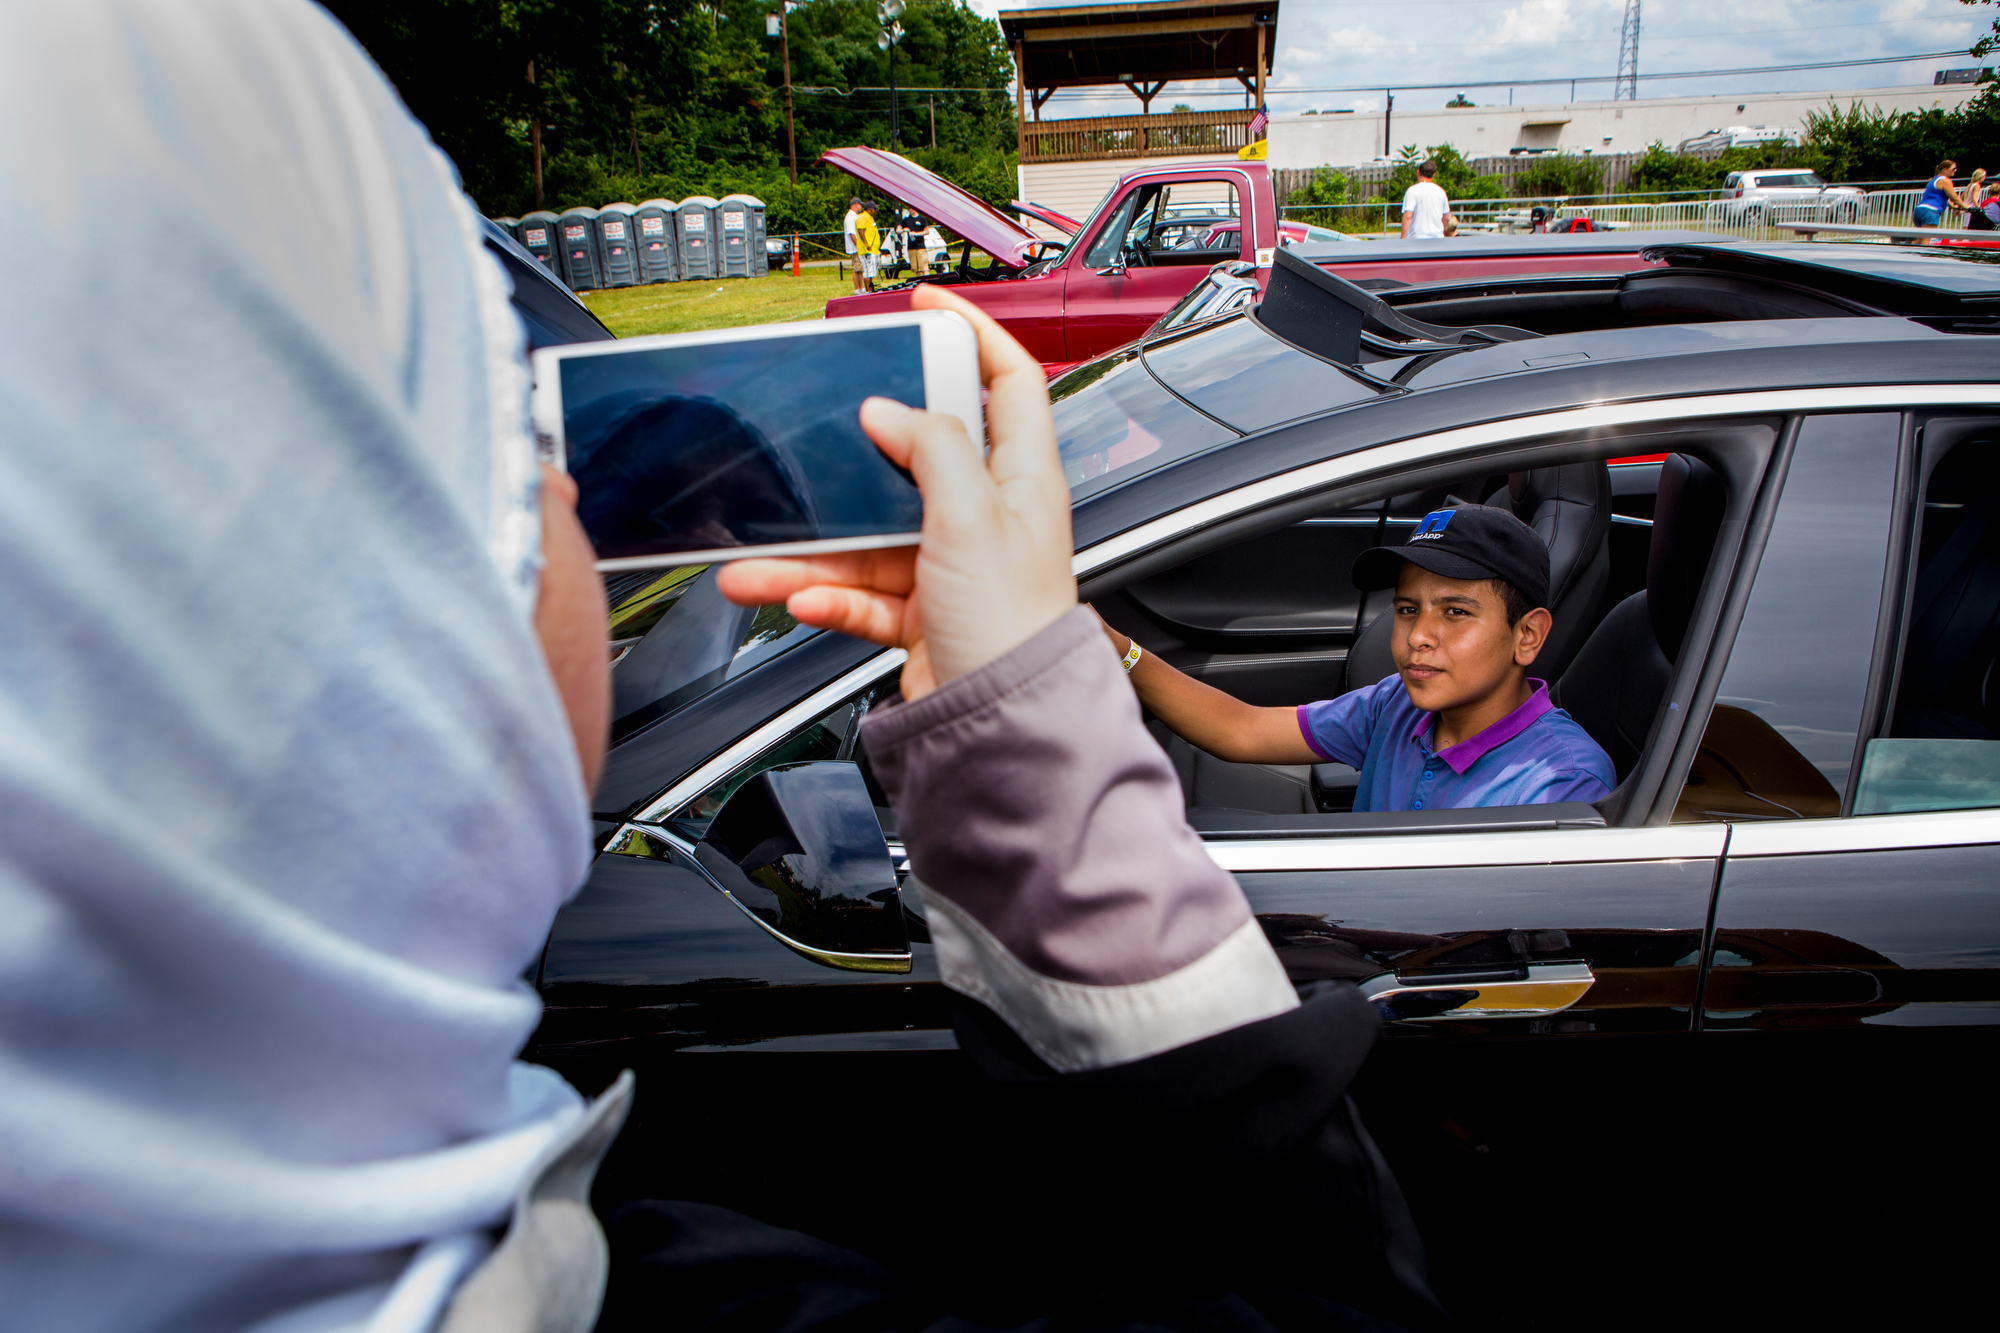  Hasan Alhamoud poses for a photo in a Tesla car at the Immaculate Heart of Mary parish festival Sunday, July 17, 2016. 